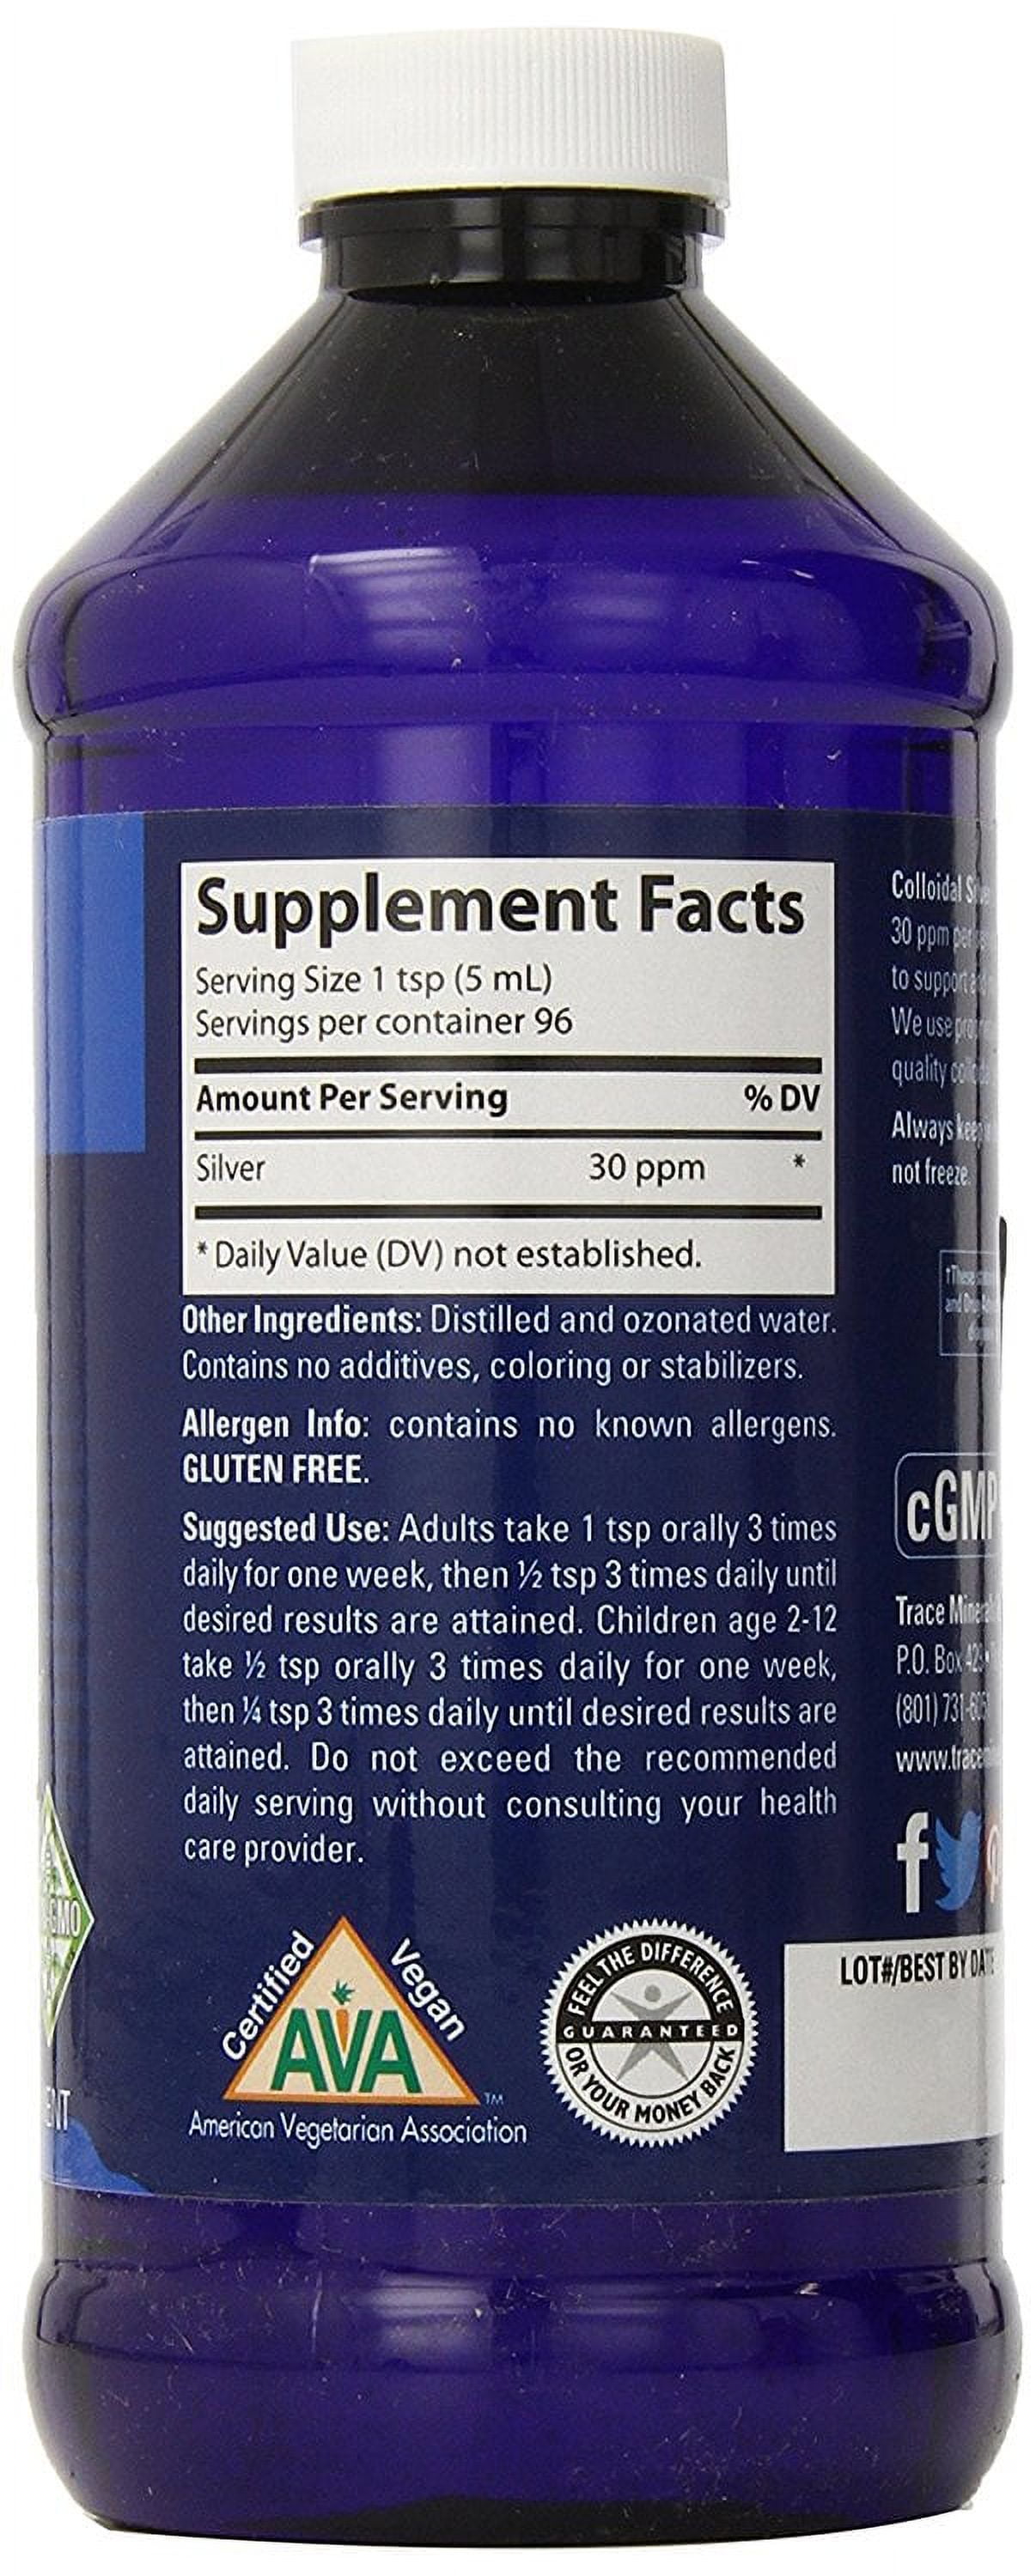 Superior Colloidal Silver 30PPM LARGE 16 oz Bottle, Ionic Colloidal Silver